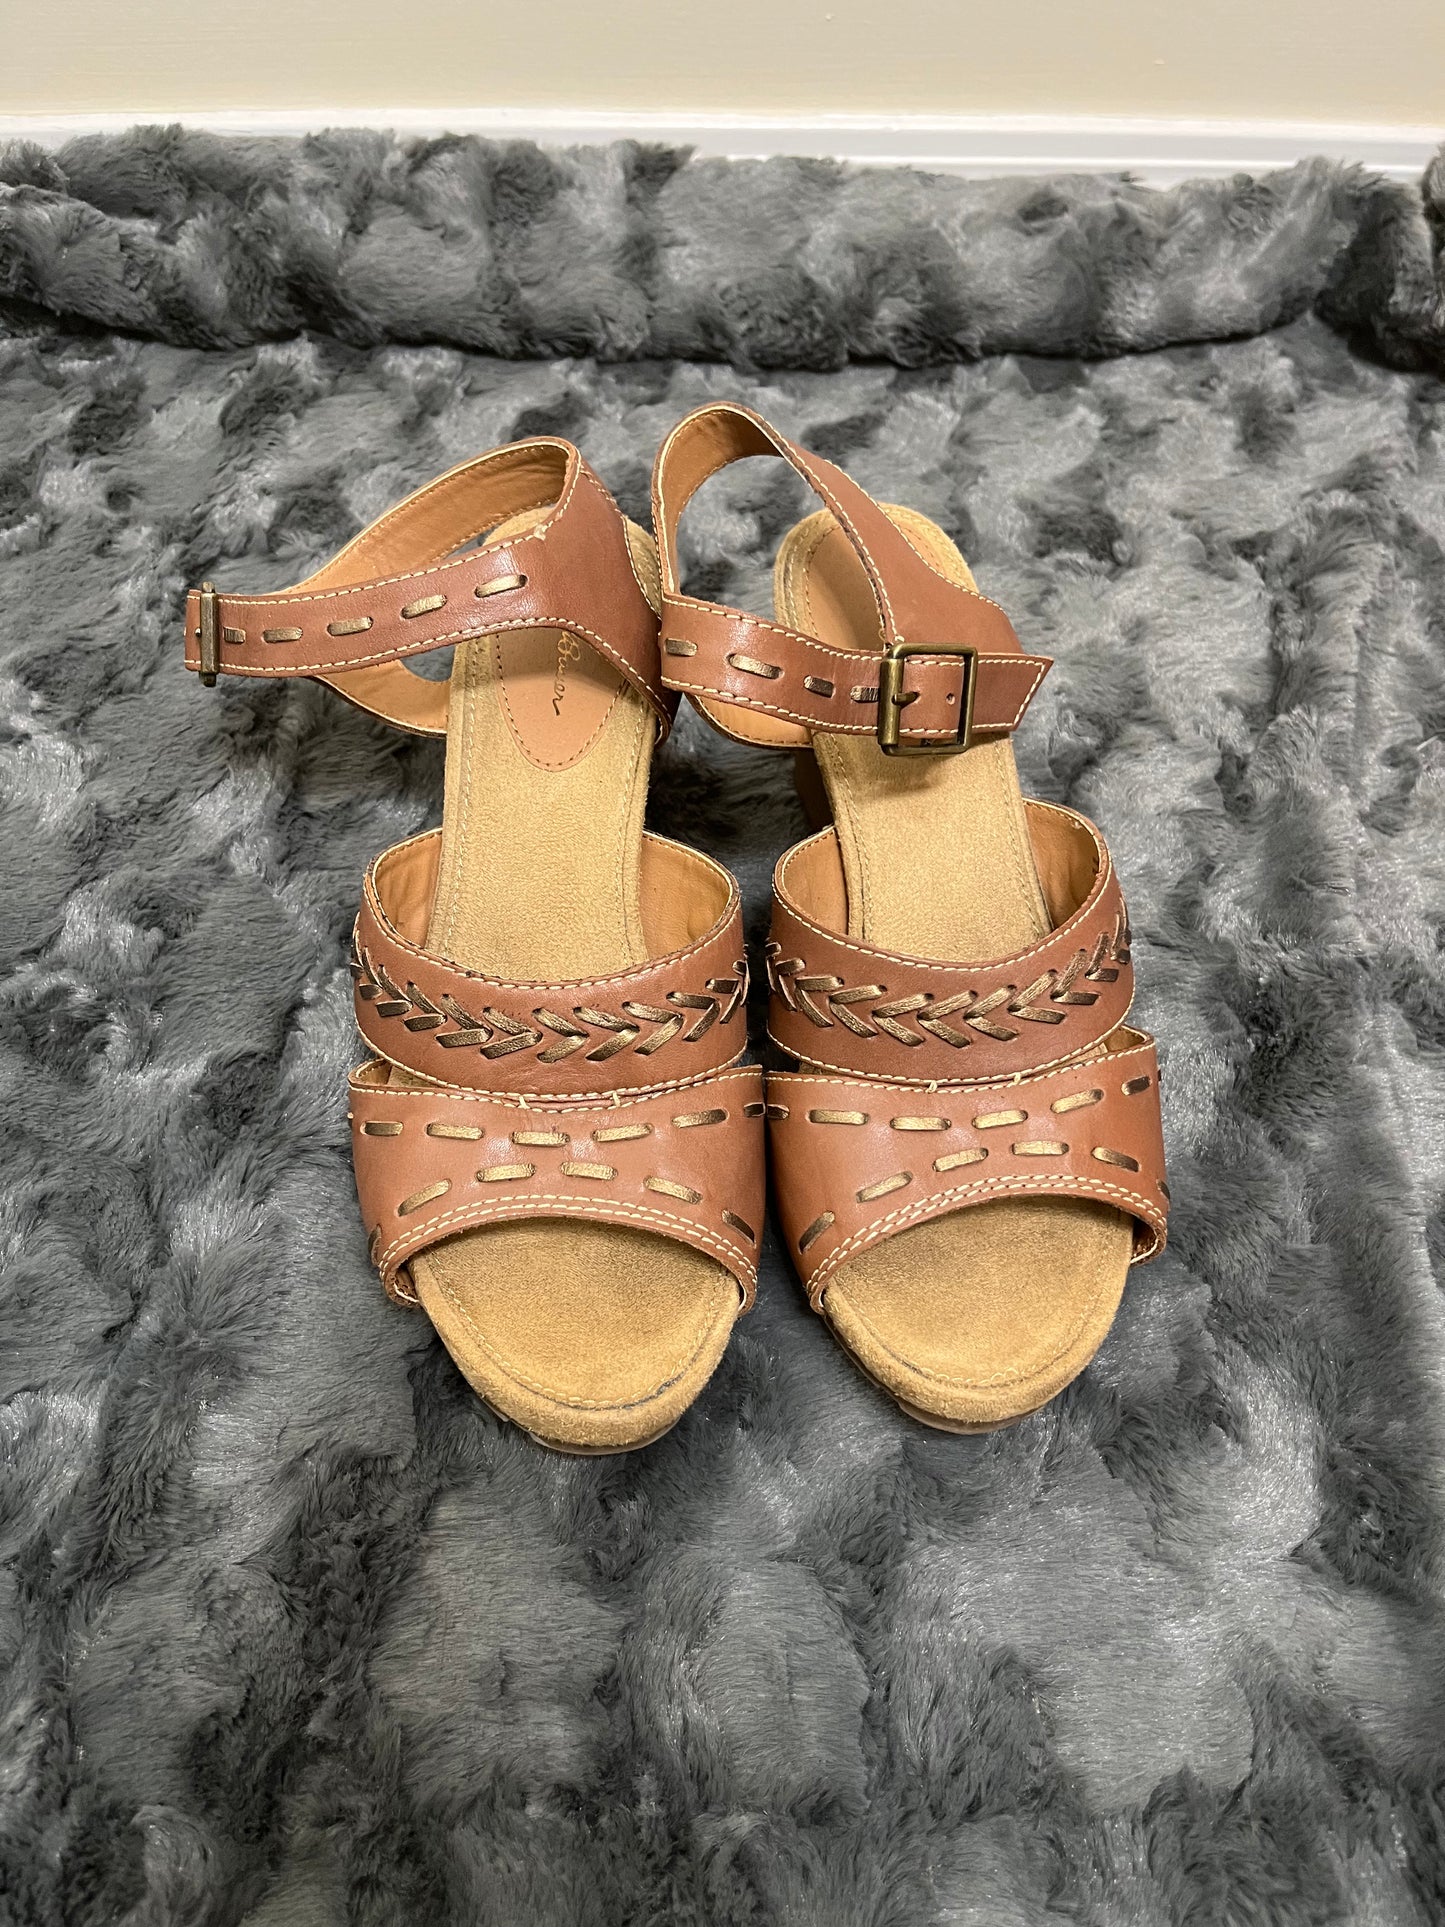 Wedge Sandals size 9